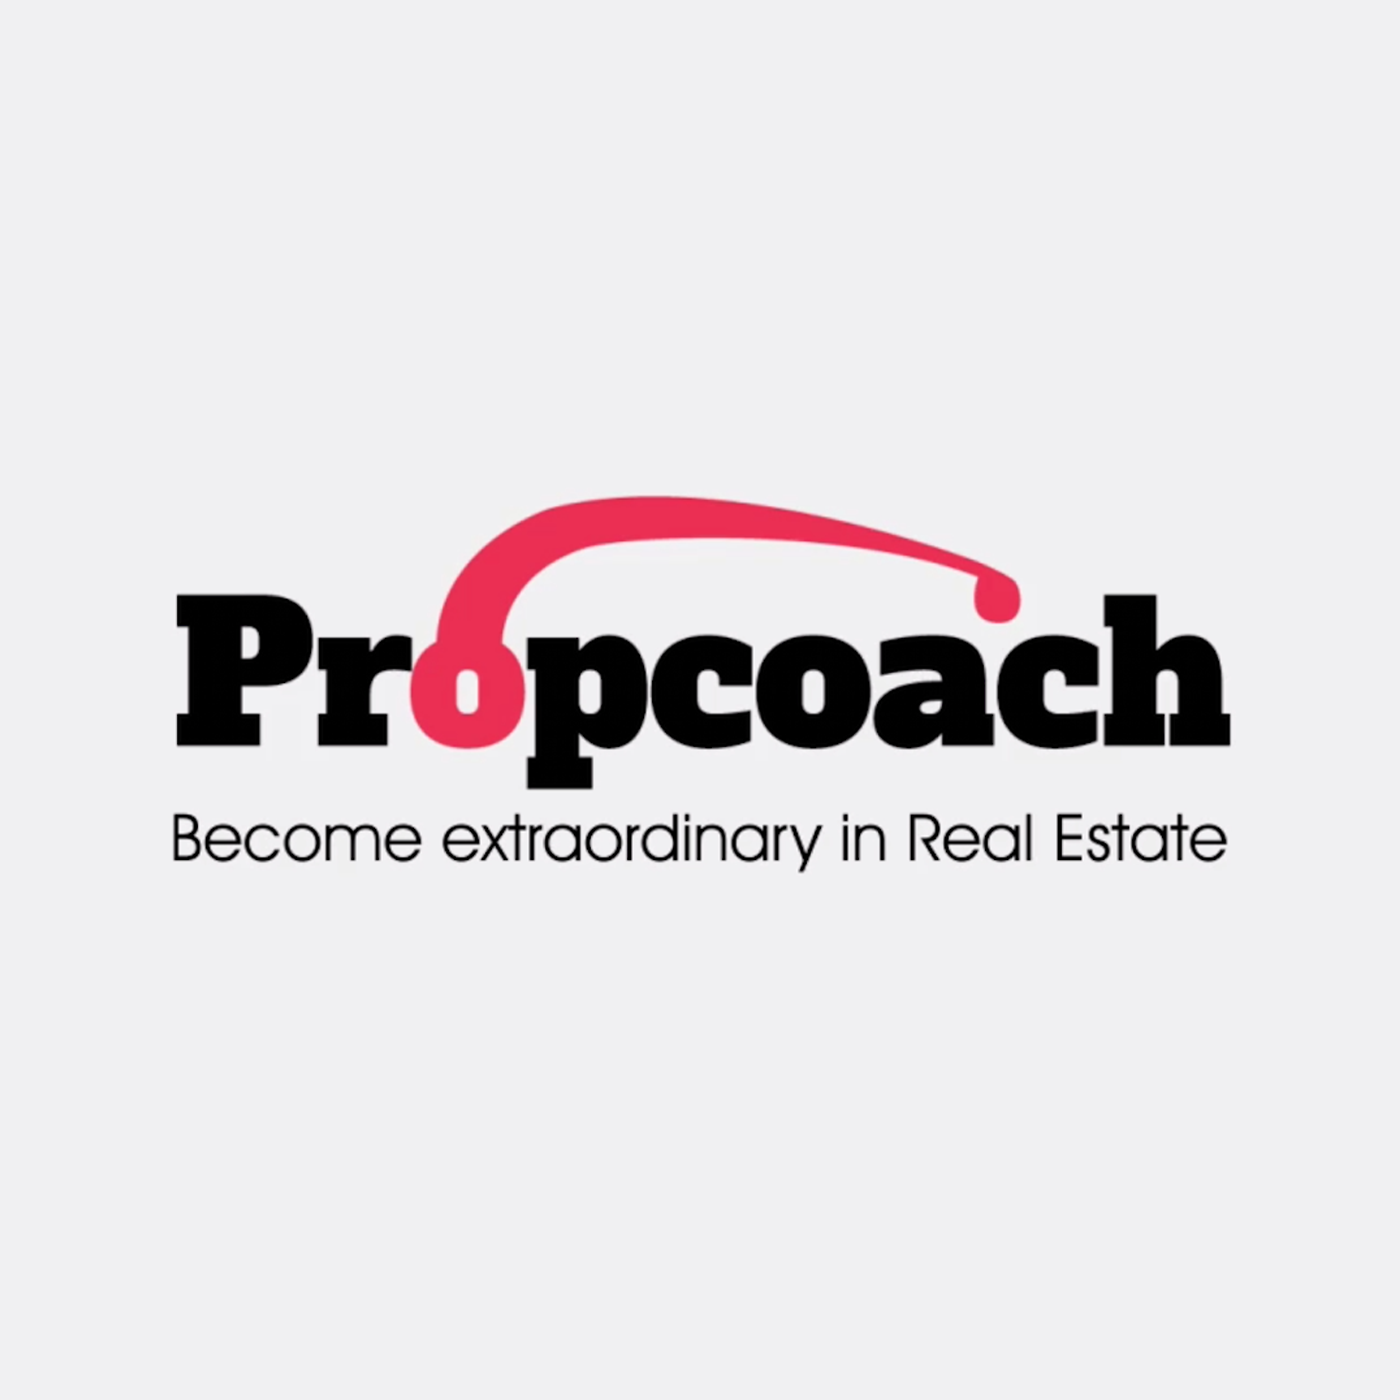 Propcoach Podcast #0004 - How to KickStart Real Estate Career